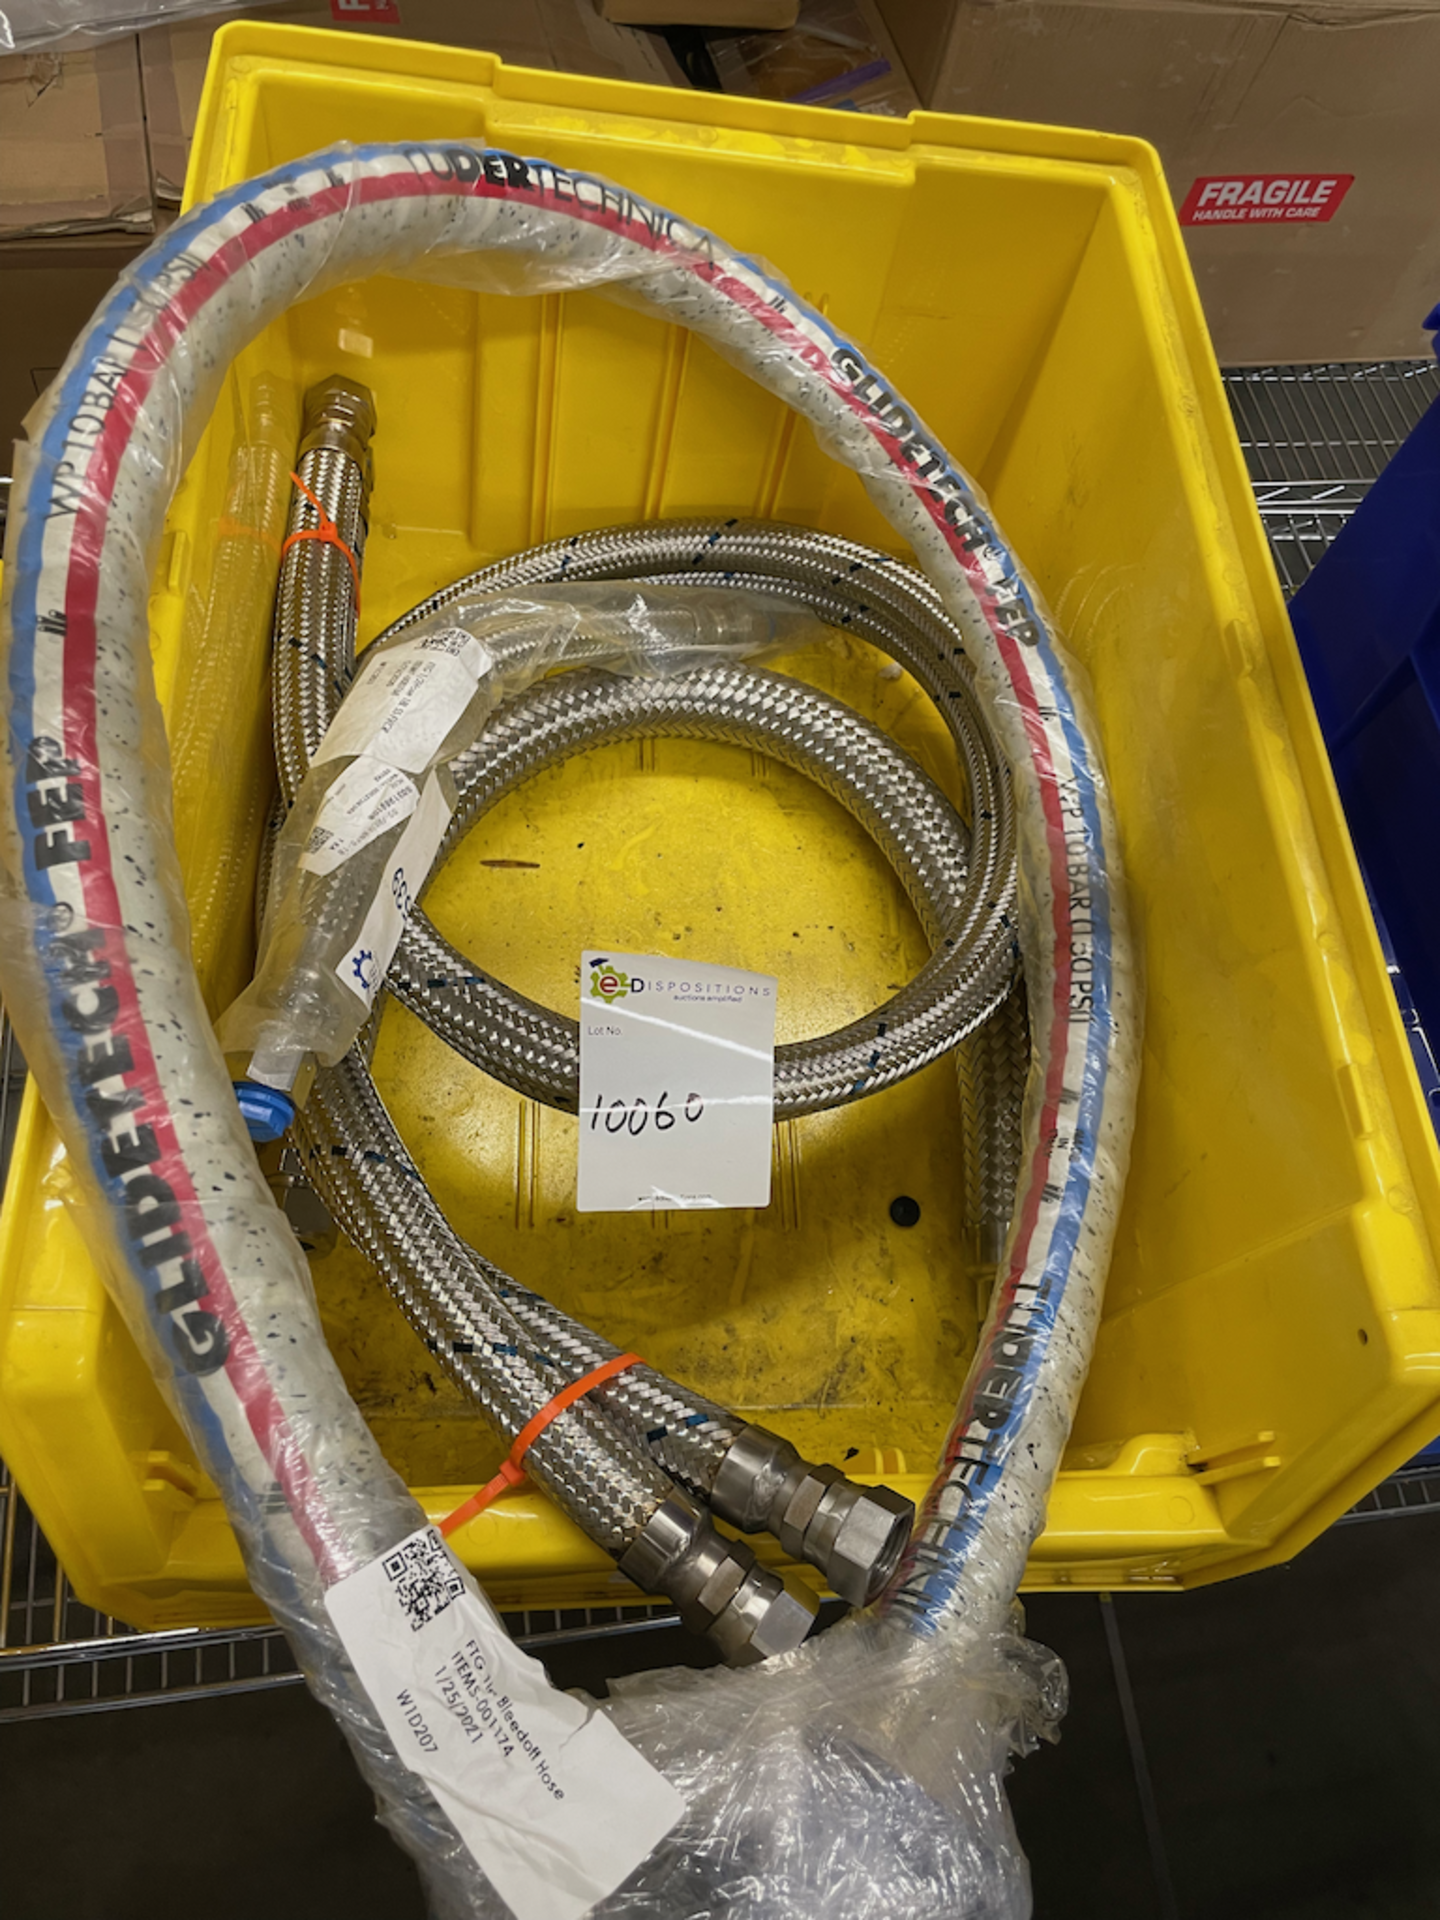 LOT CONSISTING OF QTY-4 SECTIONS OF BRAIDED WIRE TUBES | CABLES, 2 ~5' SECTIONS & 1- 2' SECTION - - Image 3 of 4